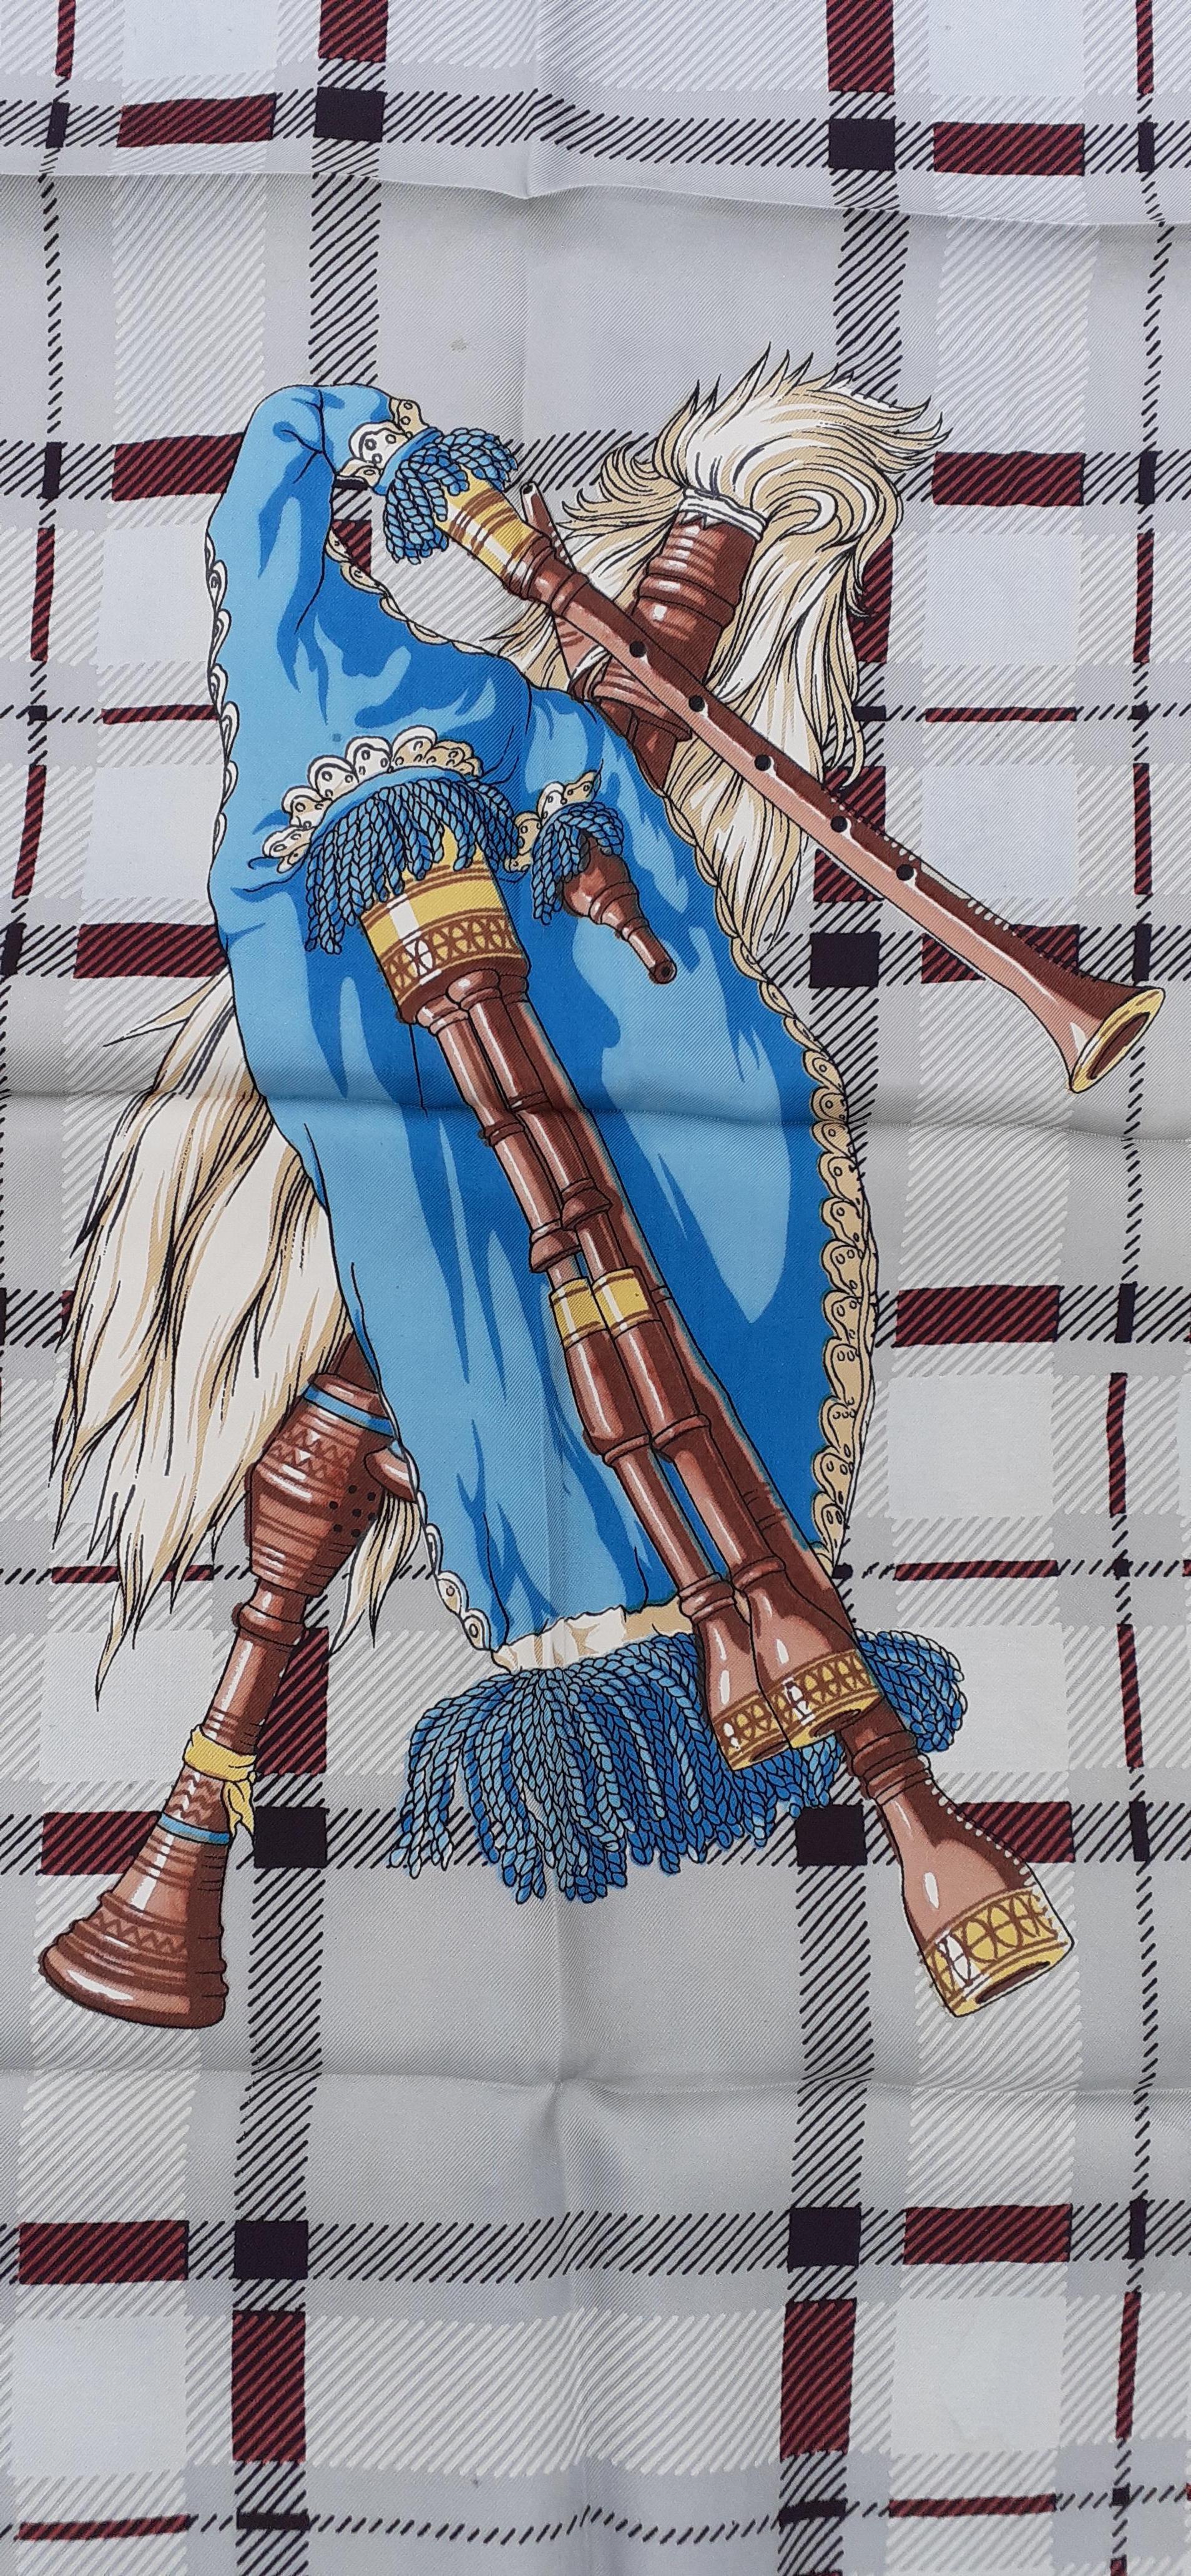 Extremely Rare Authentic Hermès Scarf

Pattern: Bagpipe (Cornemuse)

The drawing shows in its center a bagpipe, surrounded by 4 hands each holding a flower, emblem of the countries of the United Kingdom: Rose for England, Clover for Northern